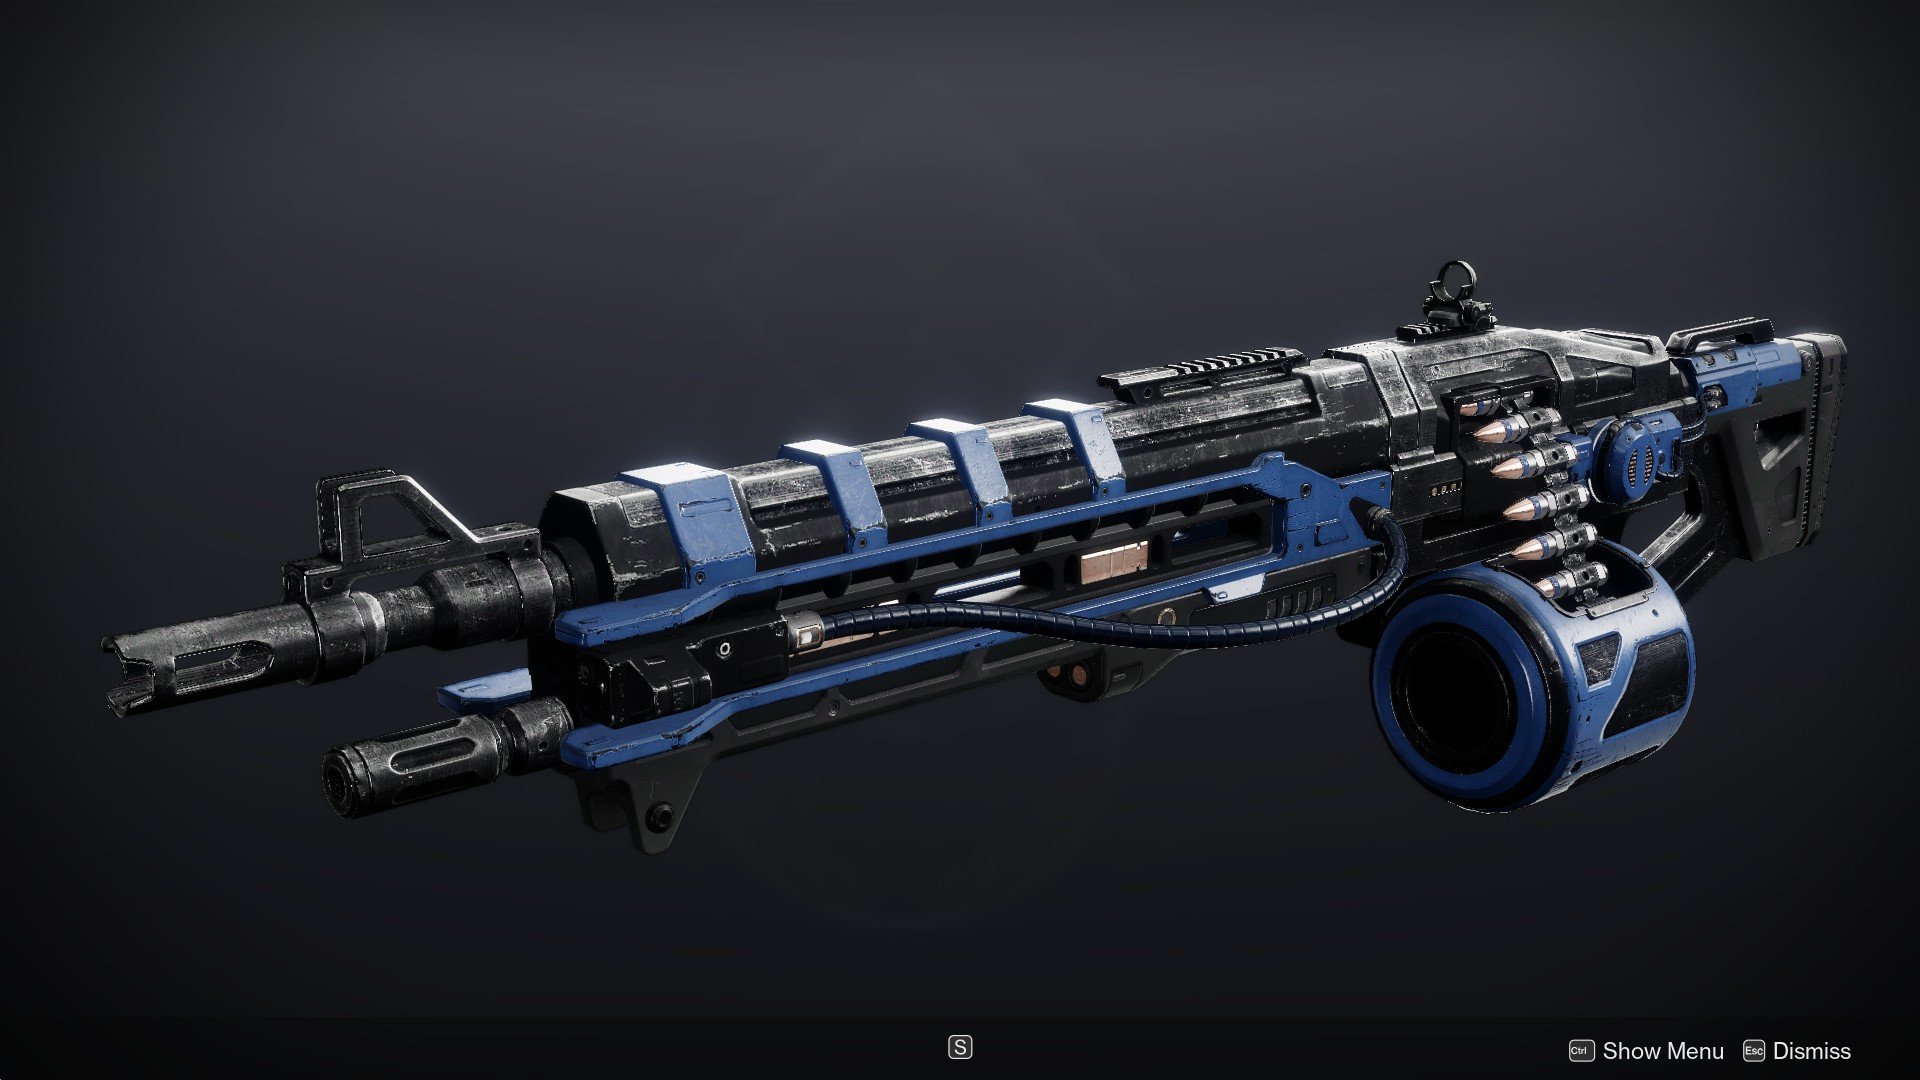 The Thunderlord LMG in Destiny 2.